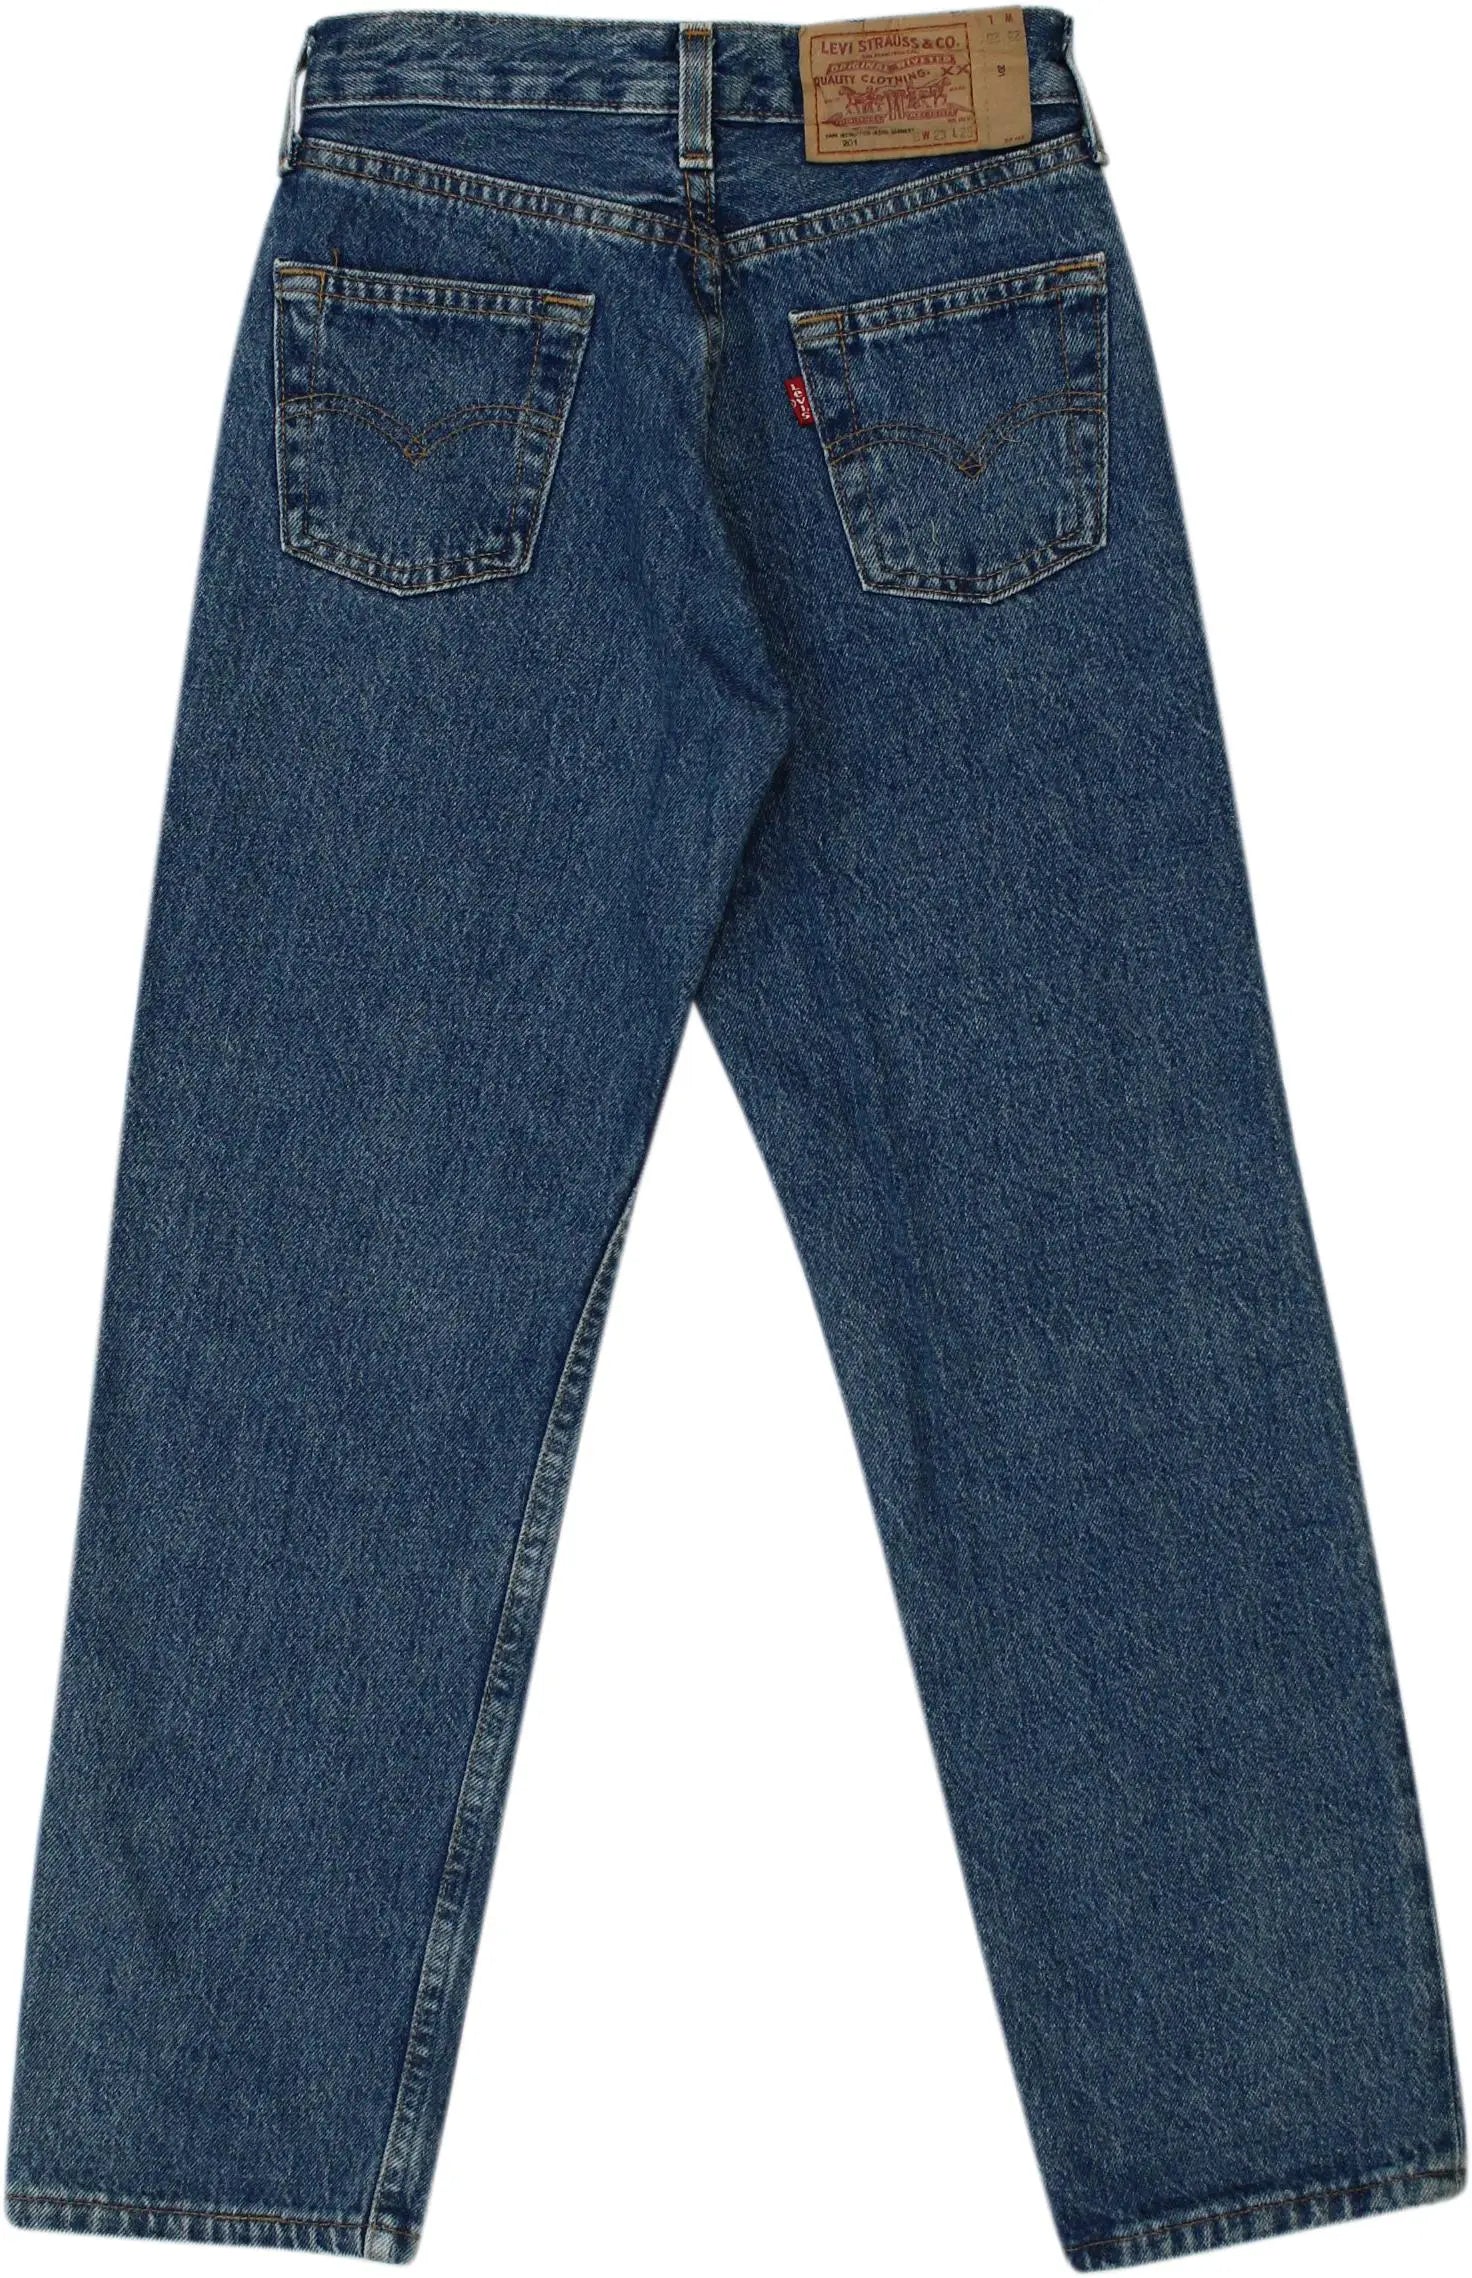 Levi's - Blue Jeans by Levi's- ThriftTale.com - Vintage and second handclothing